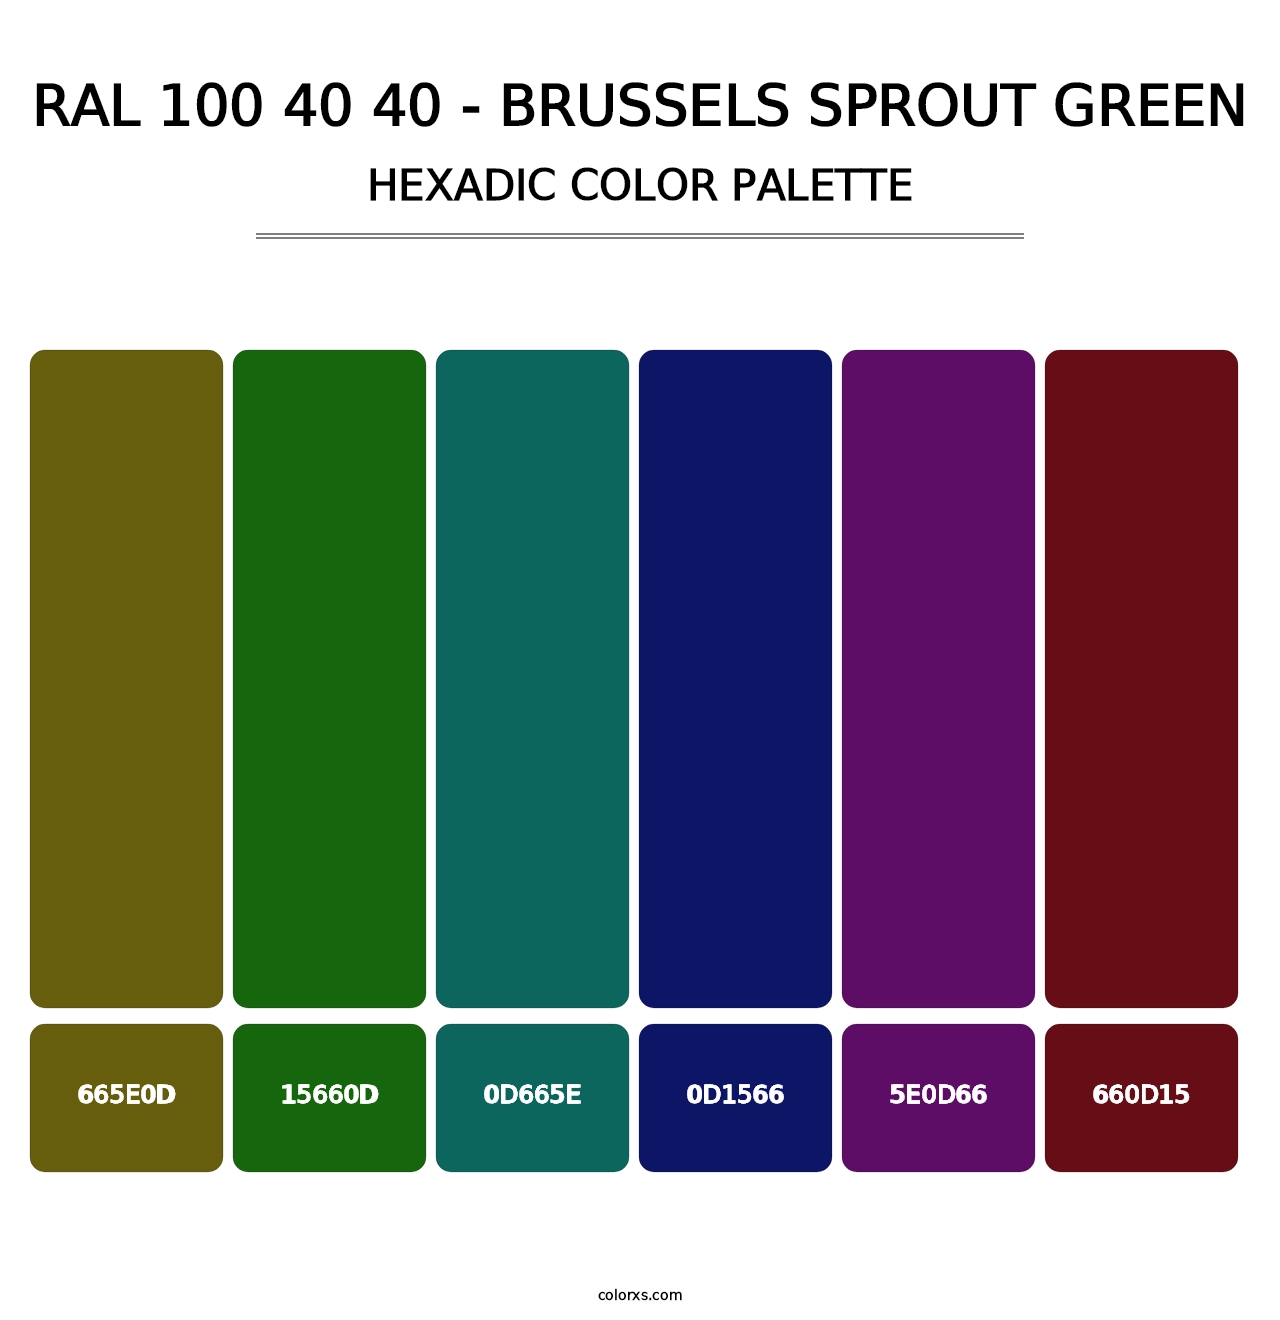 RAL 100 40 40 - Brussels Sprout Green - Hexadic Color Palette